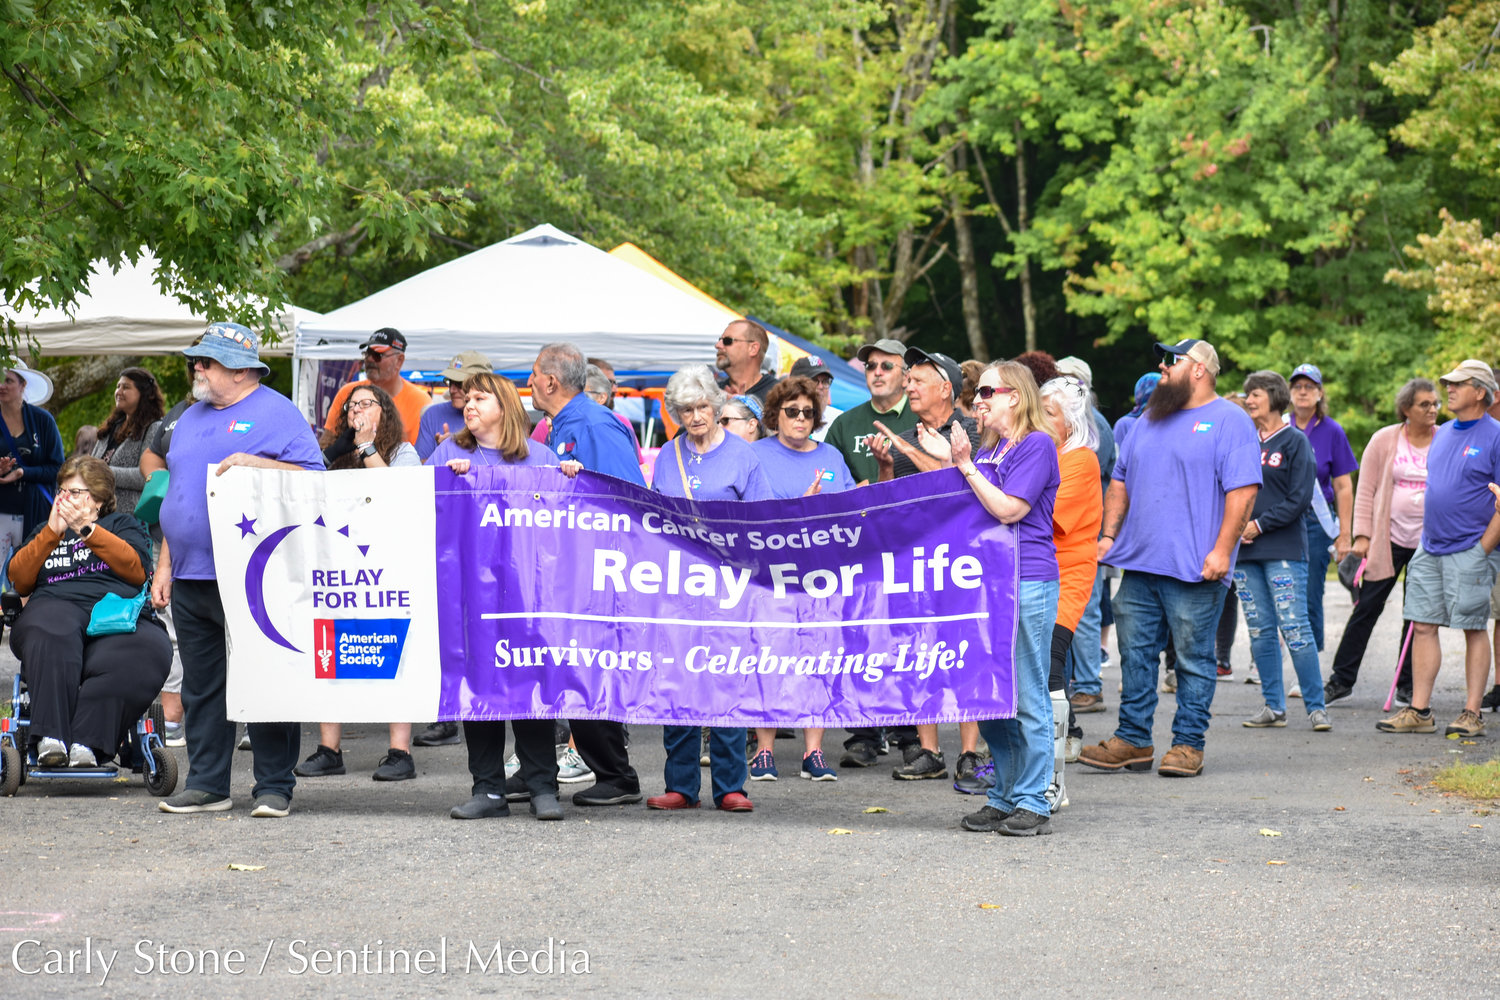 Over 50 teams signed up for the day-long Relay for Life of CNY event on September 17, 2022.